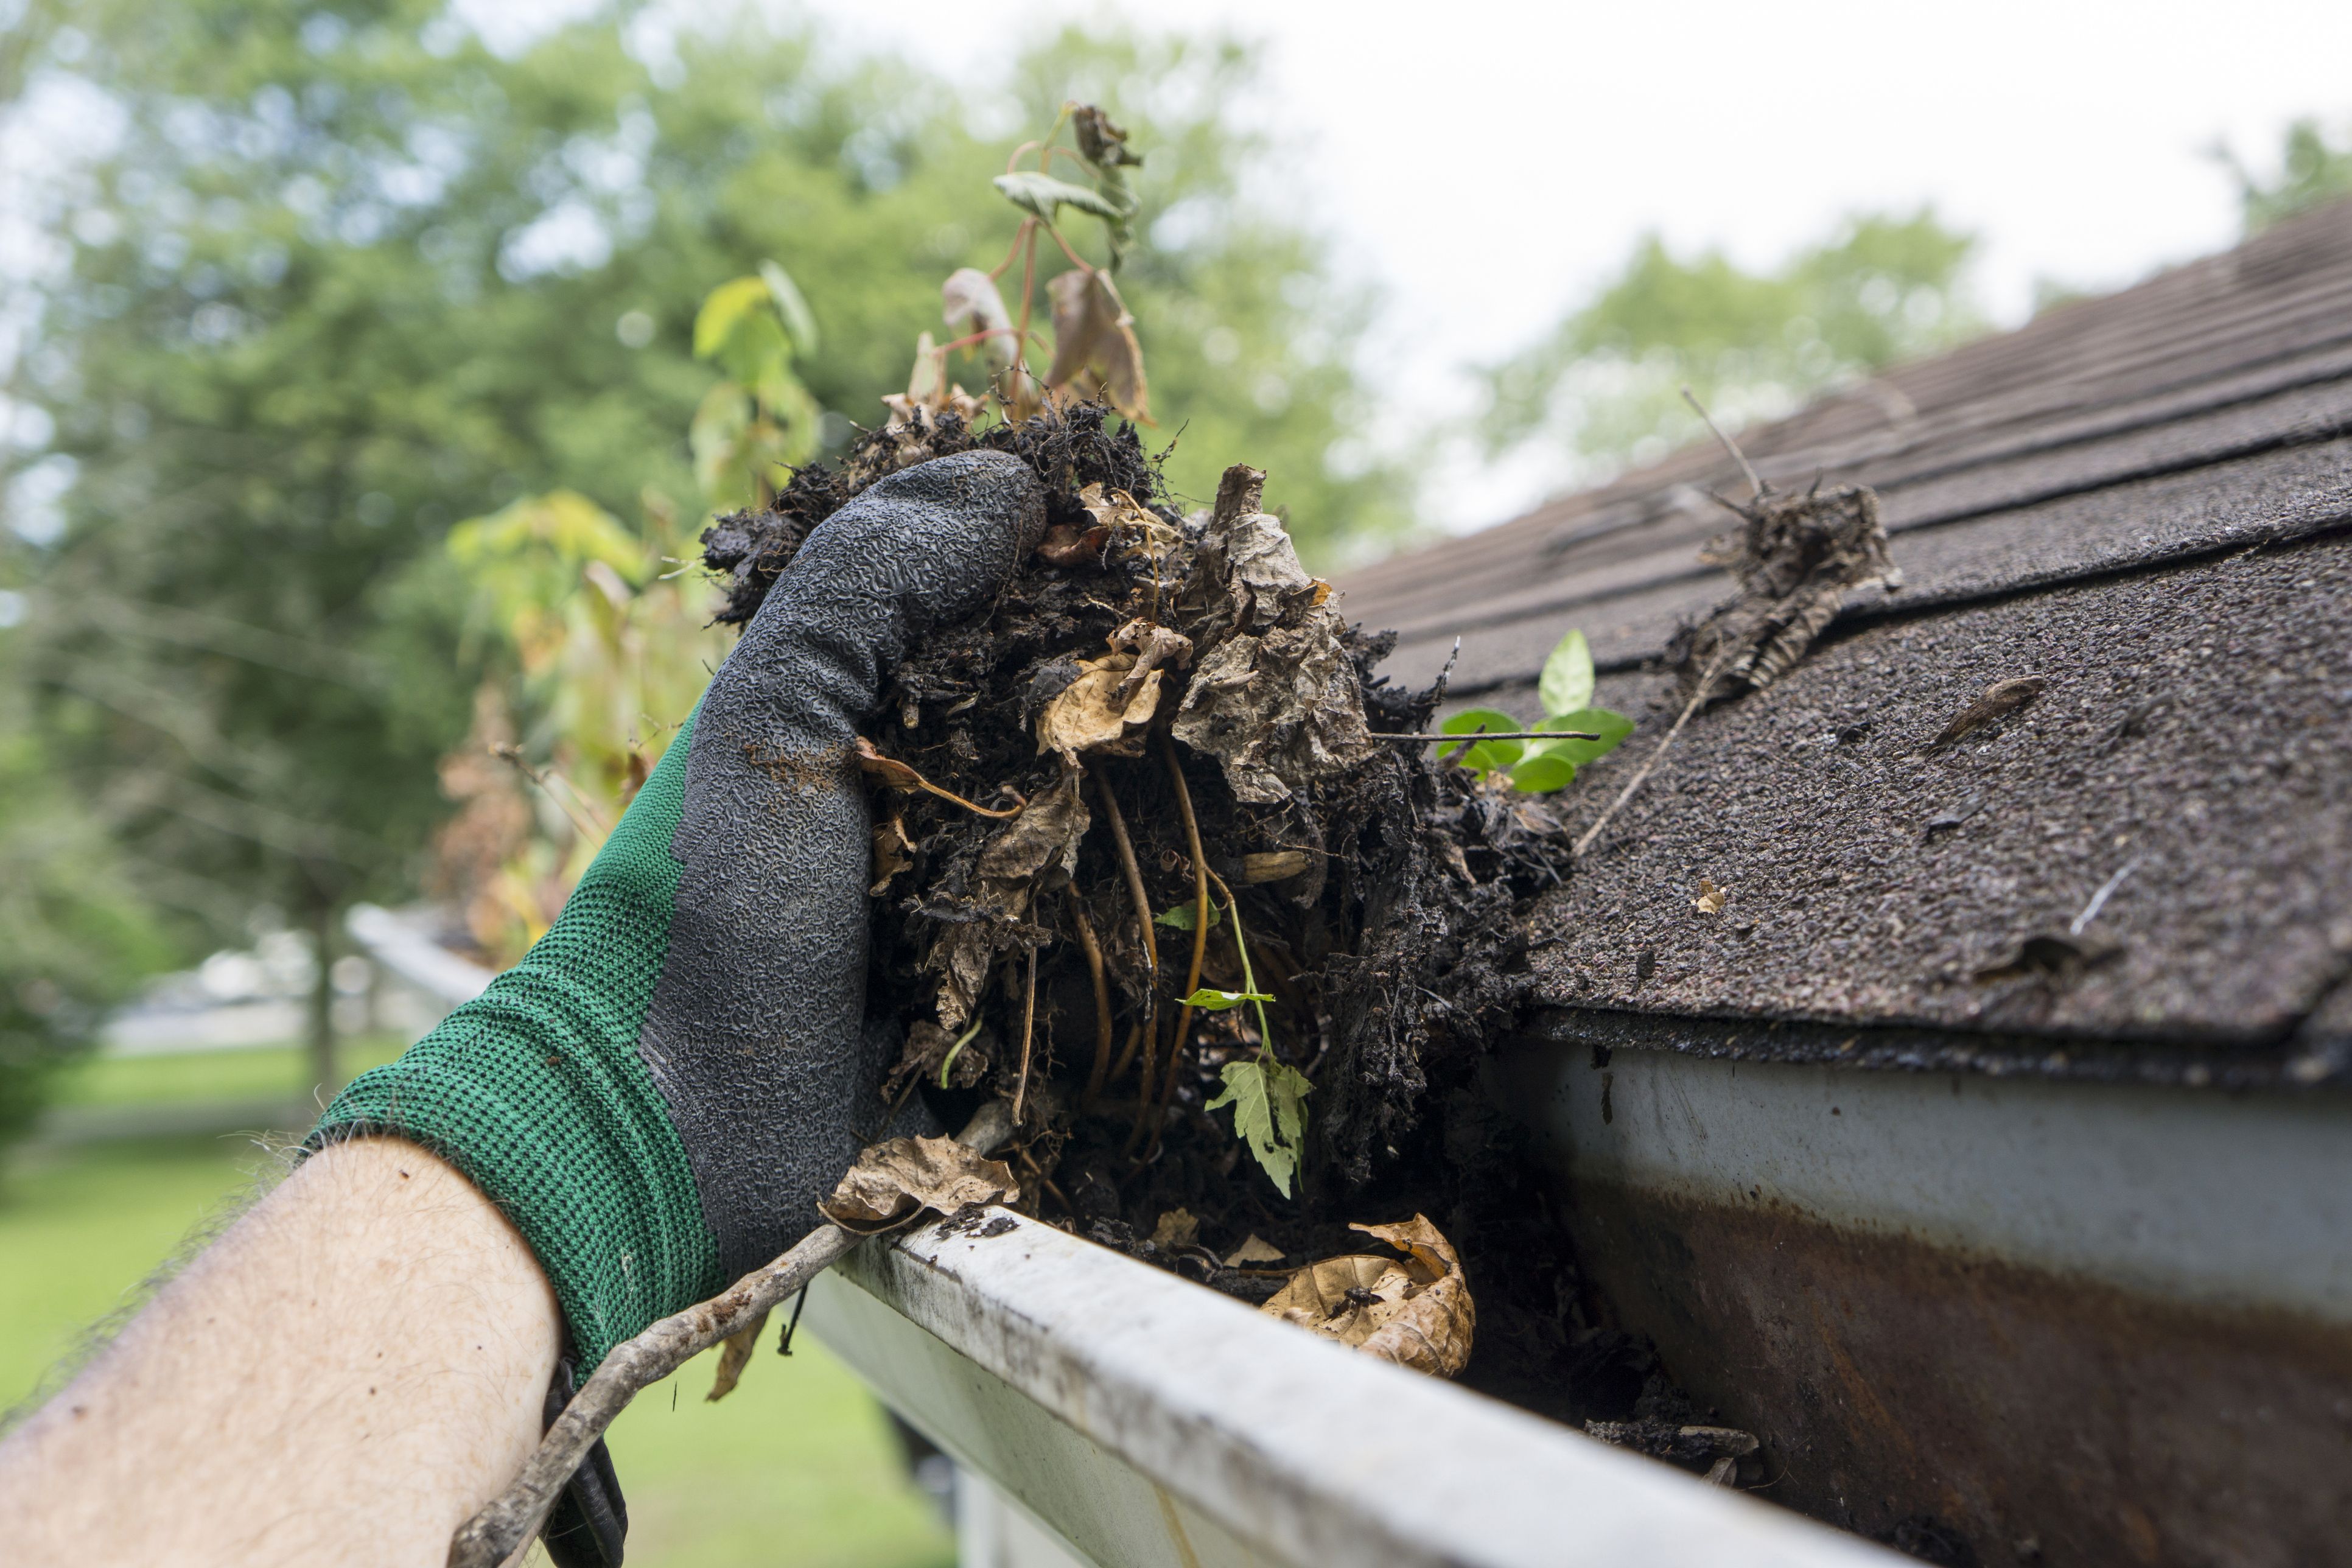 Gutter Cleaning Clacton On Sea - Some Essential Tips